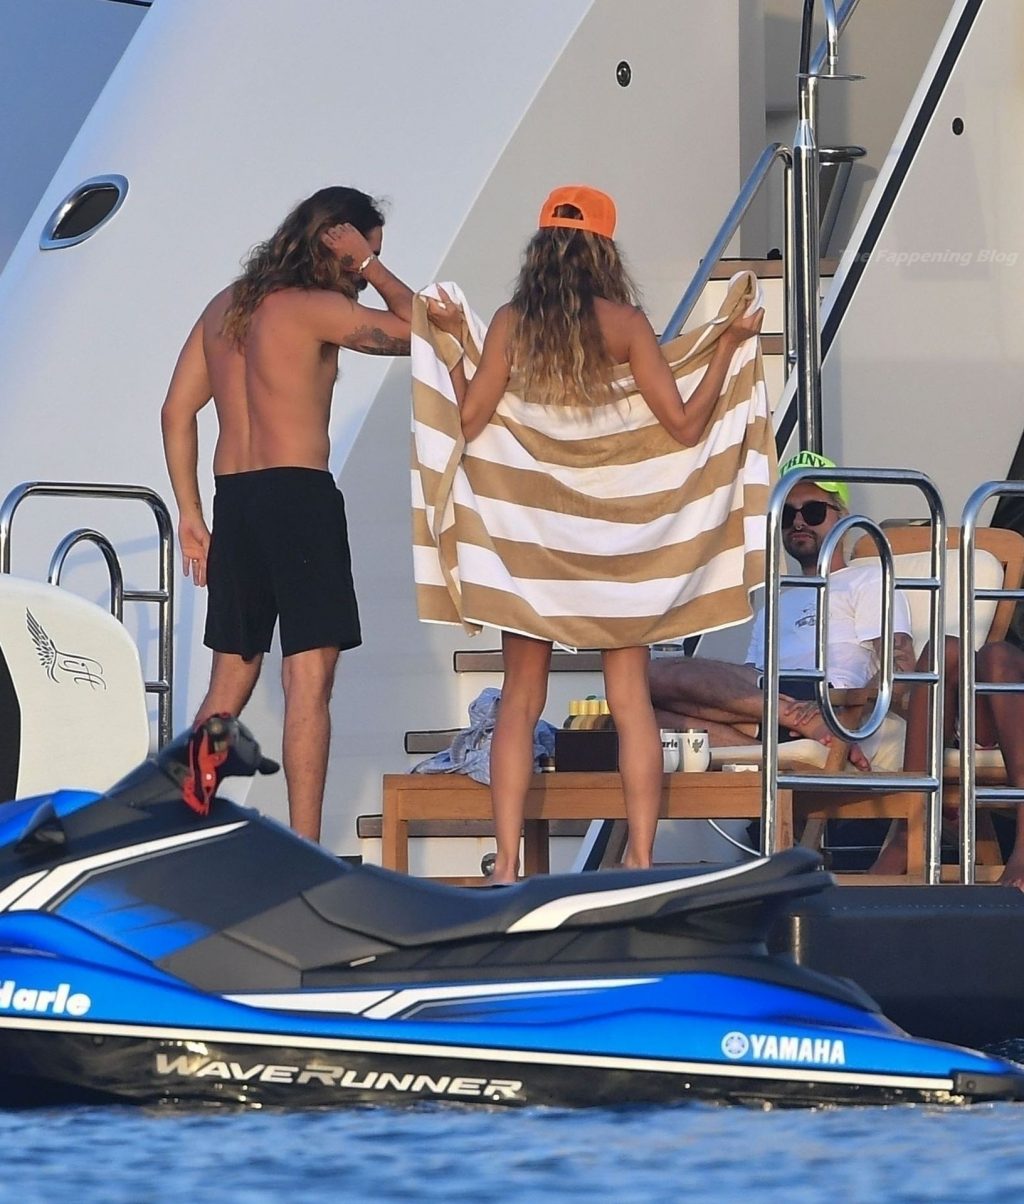 Heidi Klum Packs on the PDA with Tom Kaulitz During Their Family Holiday in Italy (81 Photos)